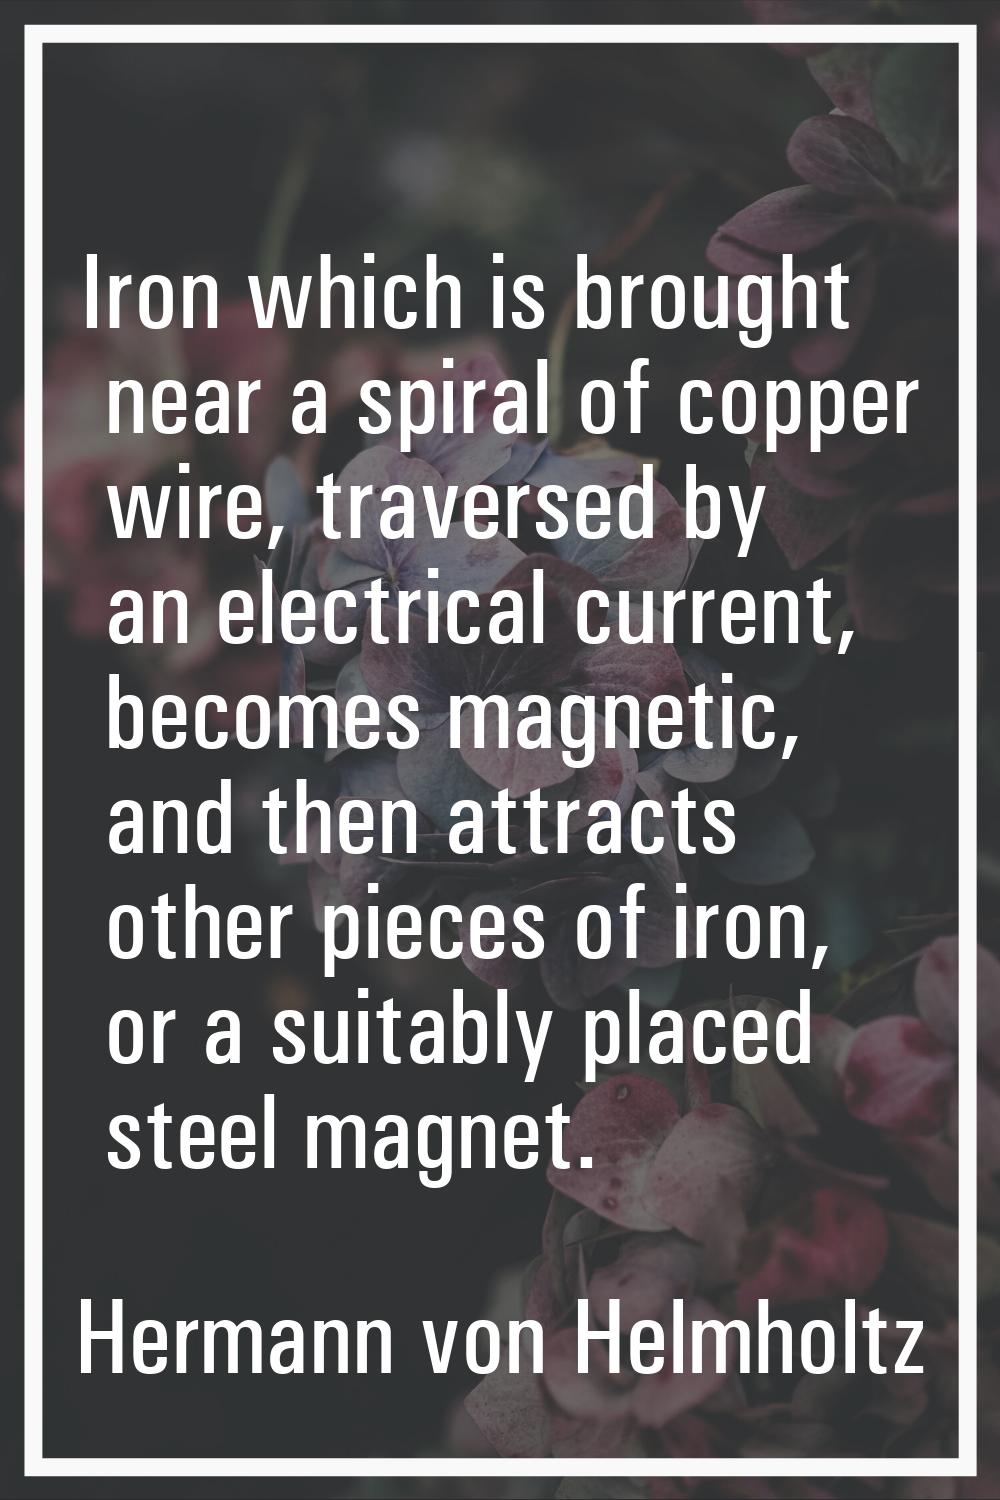 Iron which is brought near a spiral of copper wire, traversed by an electrical current, becomes mag